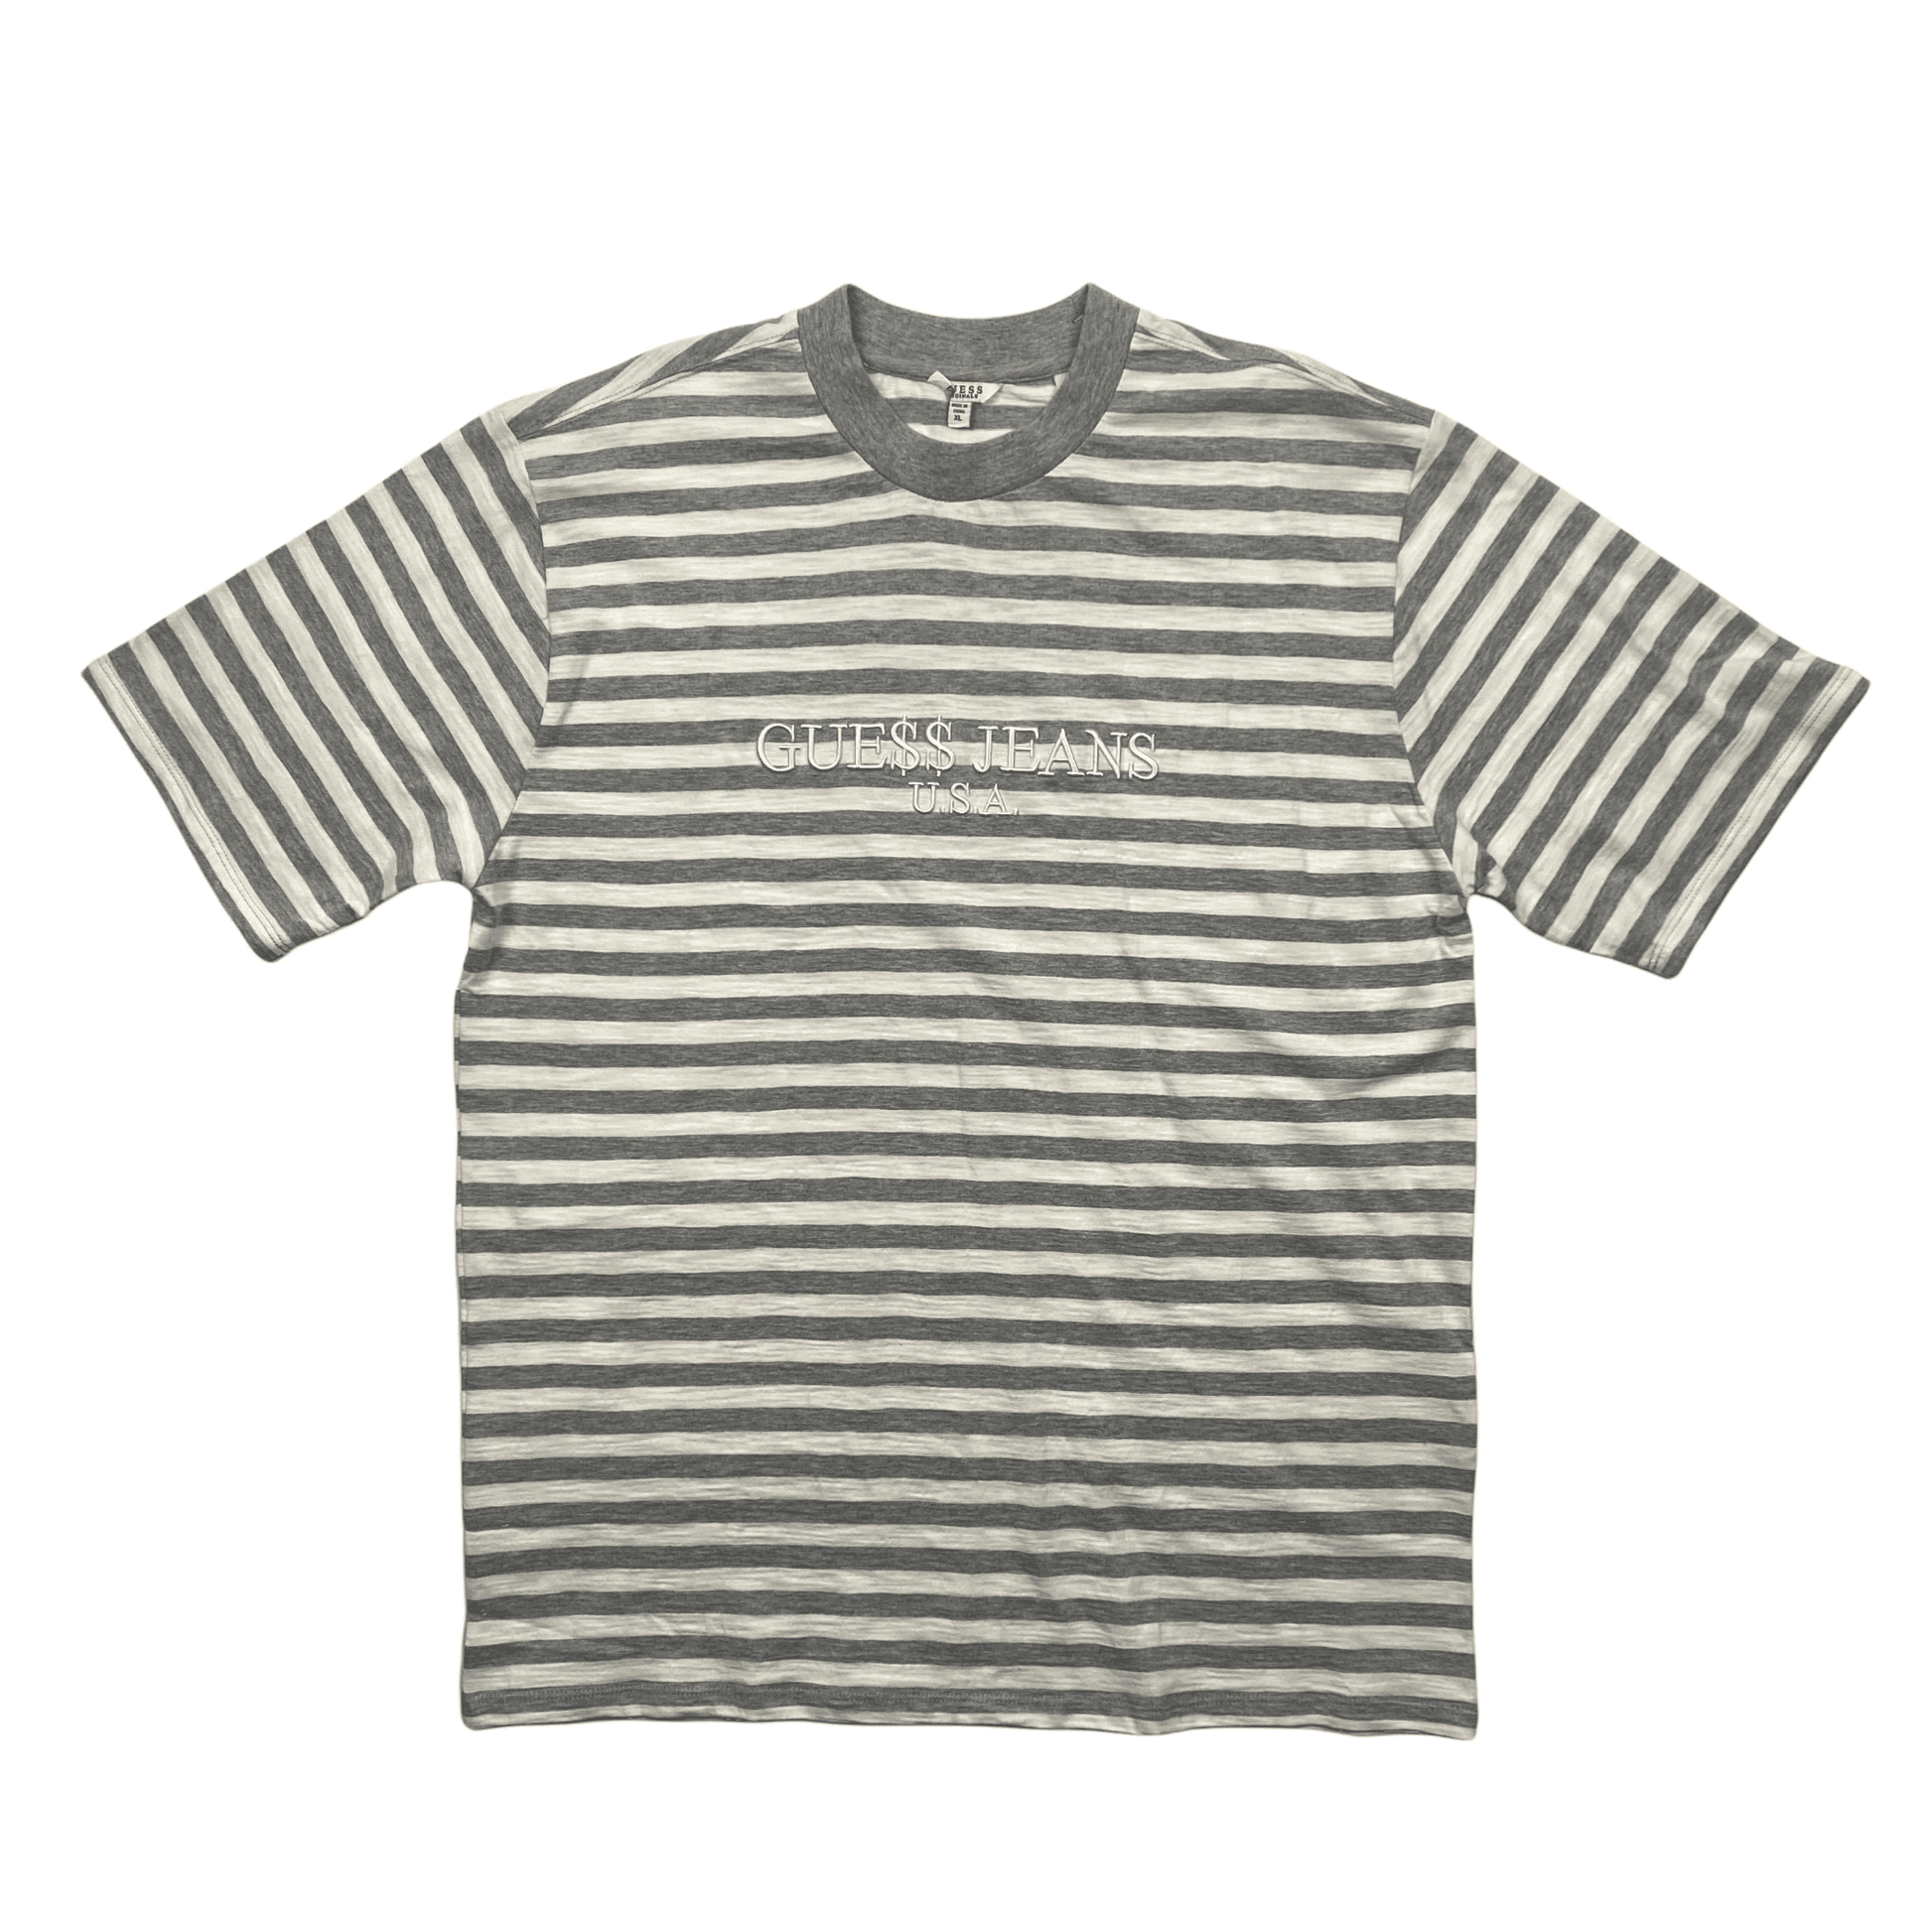 Grey + White Guess Jeans x ASAP Rocky Striped Tee - Extra Large - The Streetwear Studio